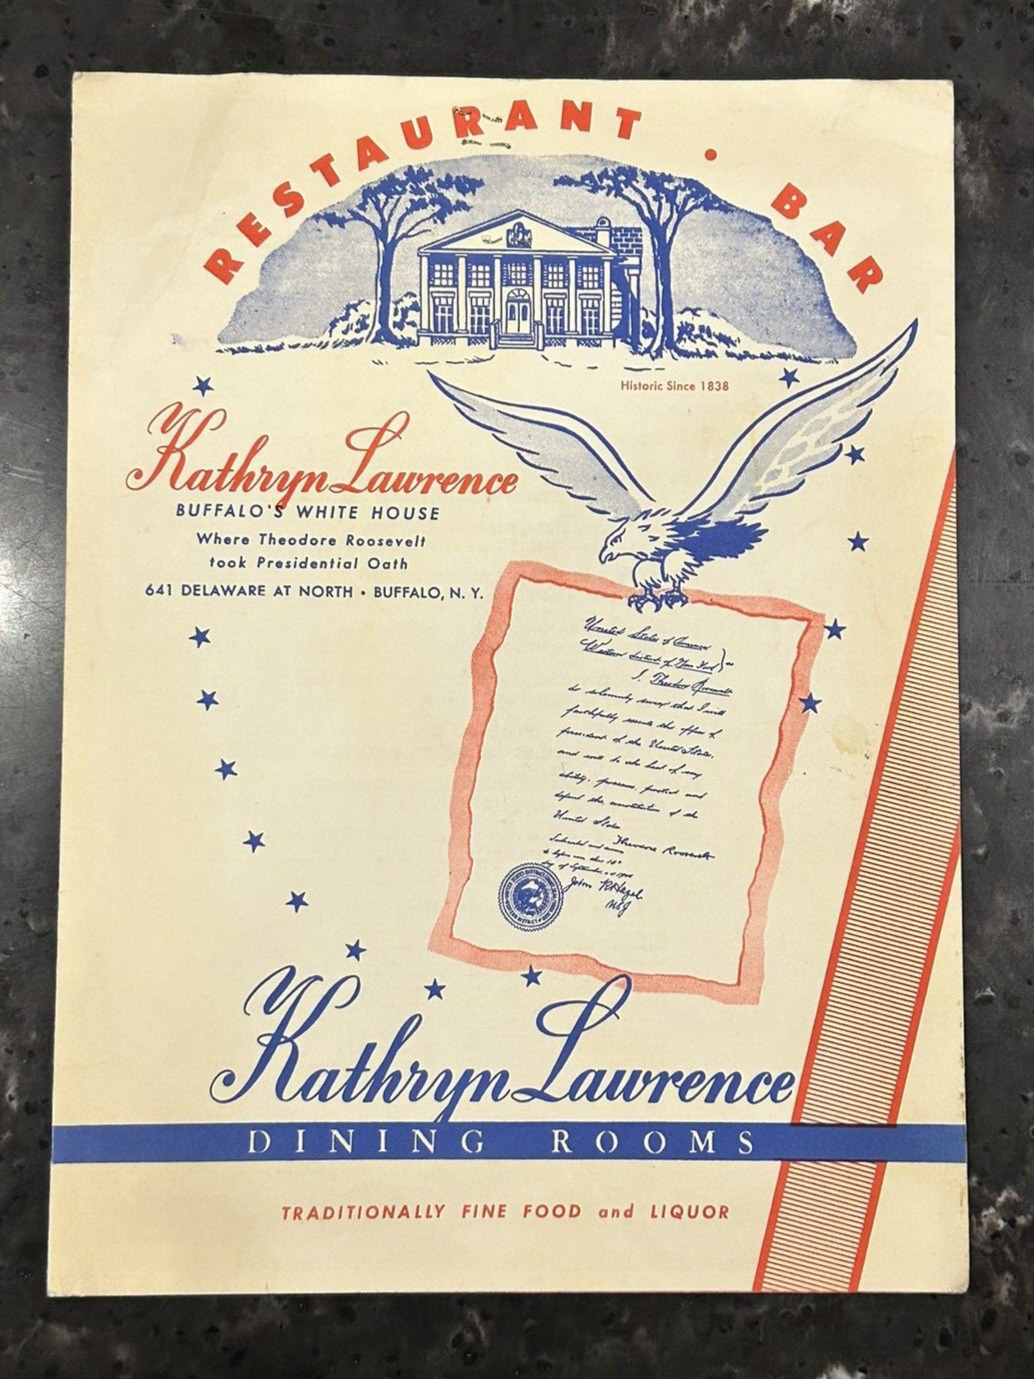 Vintage Kathryn Lawrence Menu - Where Theodore Roosevelt took Presidential Outh